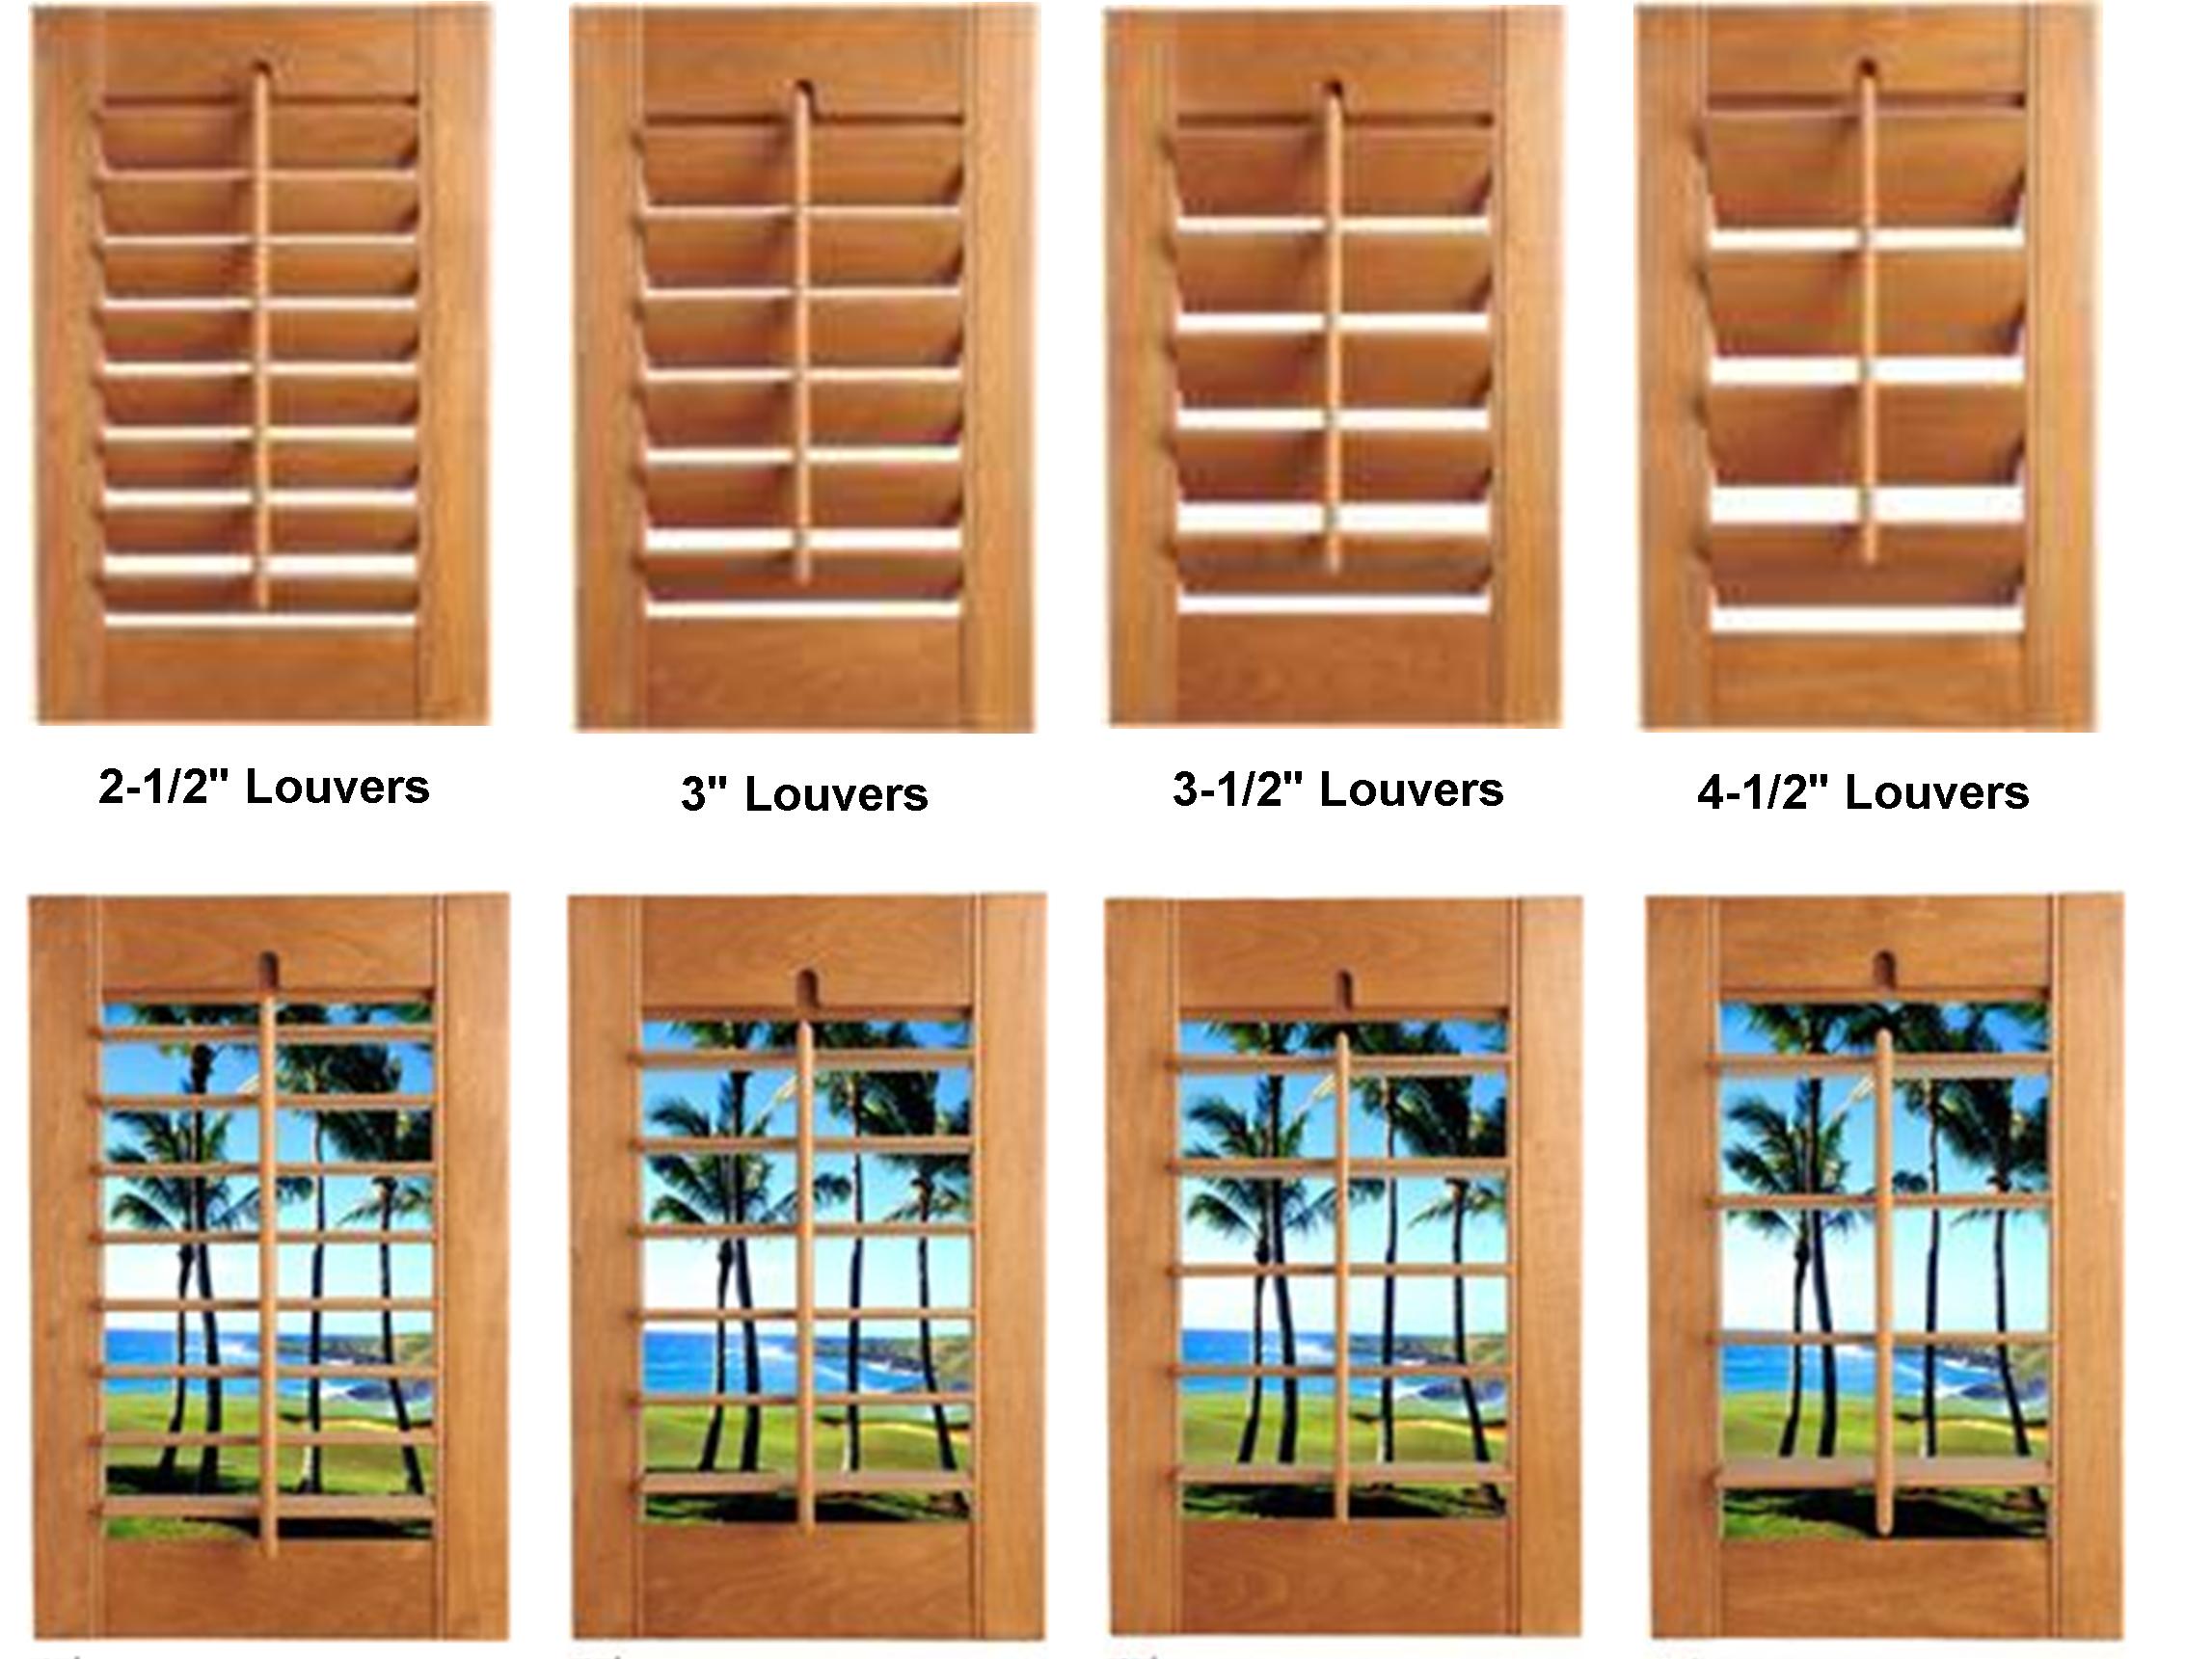 SHUTTERS LOUVER SIZES  -  FREE Estimates & FREE In-Home Consulation - Blinds, Shutters, Window Blinds, Plantation Shutters, Vertical Blinds, Mini Blinds, Wood Shutters, Venetian Blinds, Shades, Vinyl Blinds, Plantation Shutters, Window Shutters, Faux wood Blinds, Vertical Blinds, Wood Blinds, Roman Shades, Drapery, Draperies